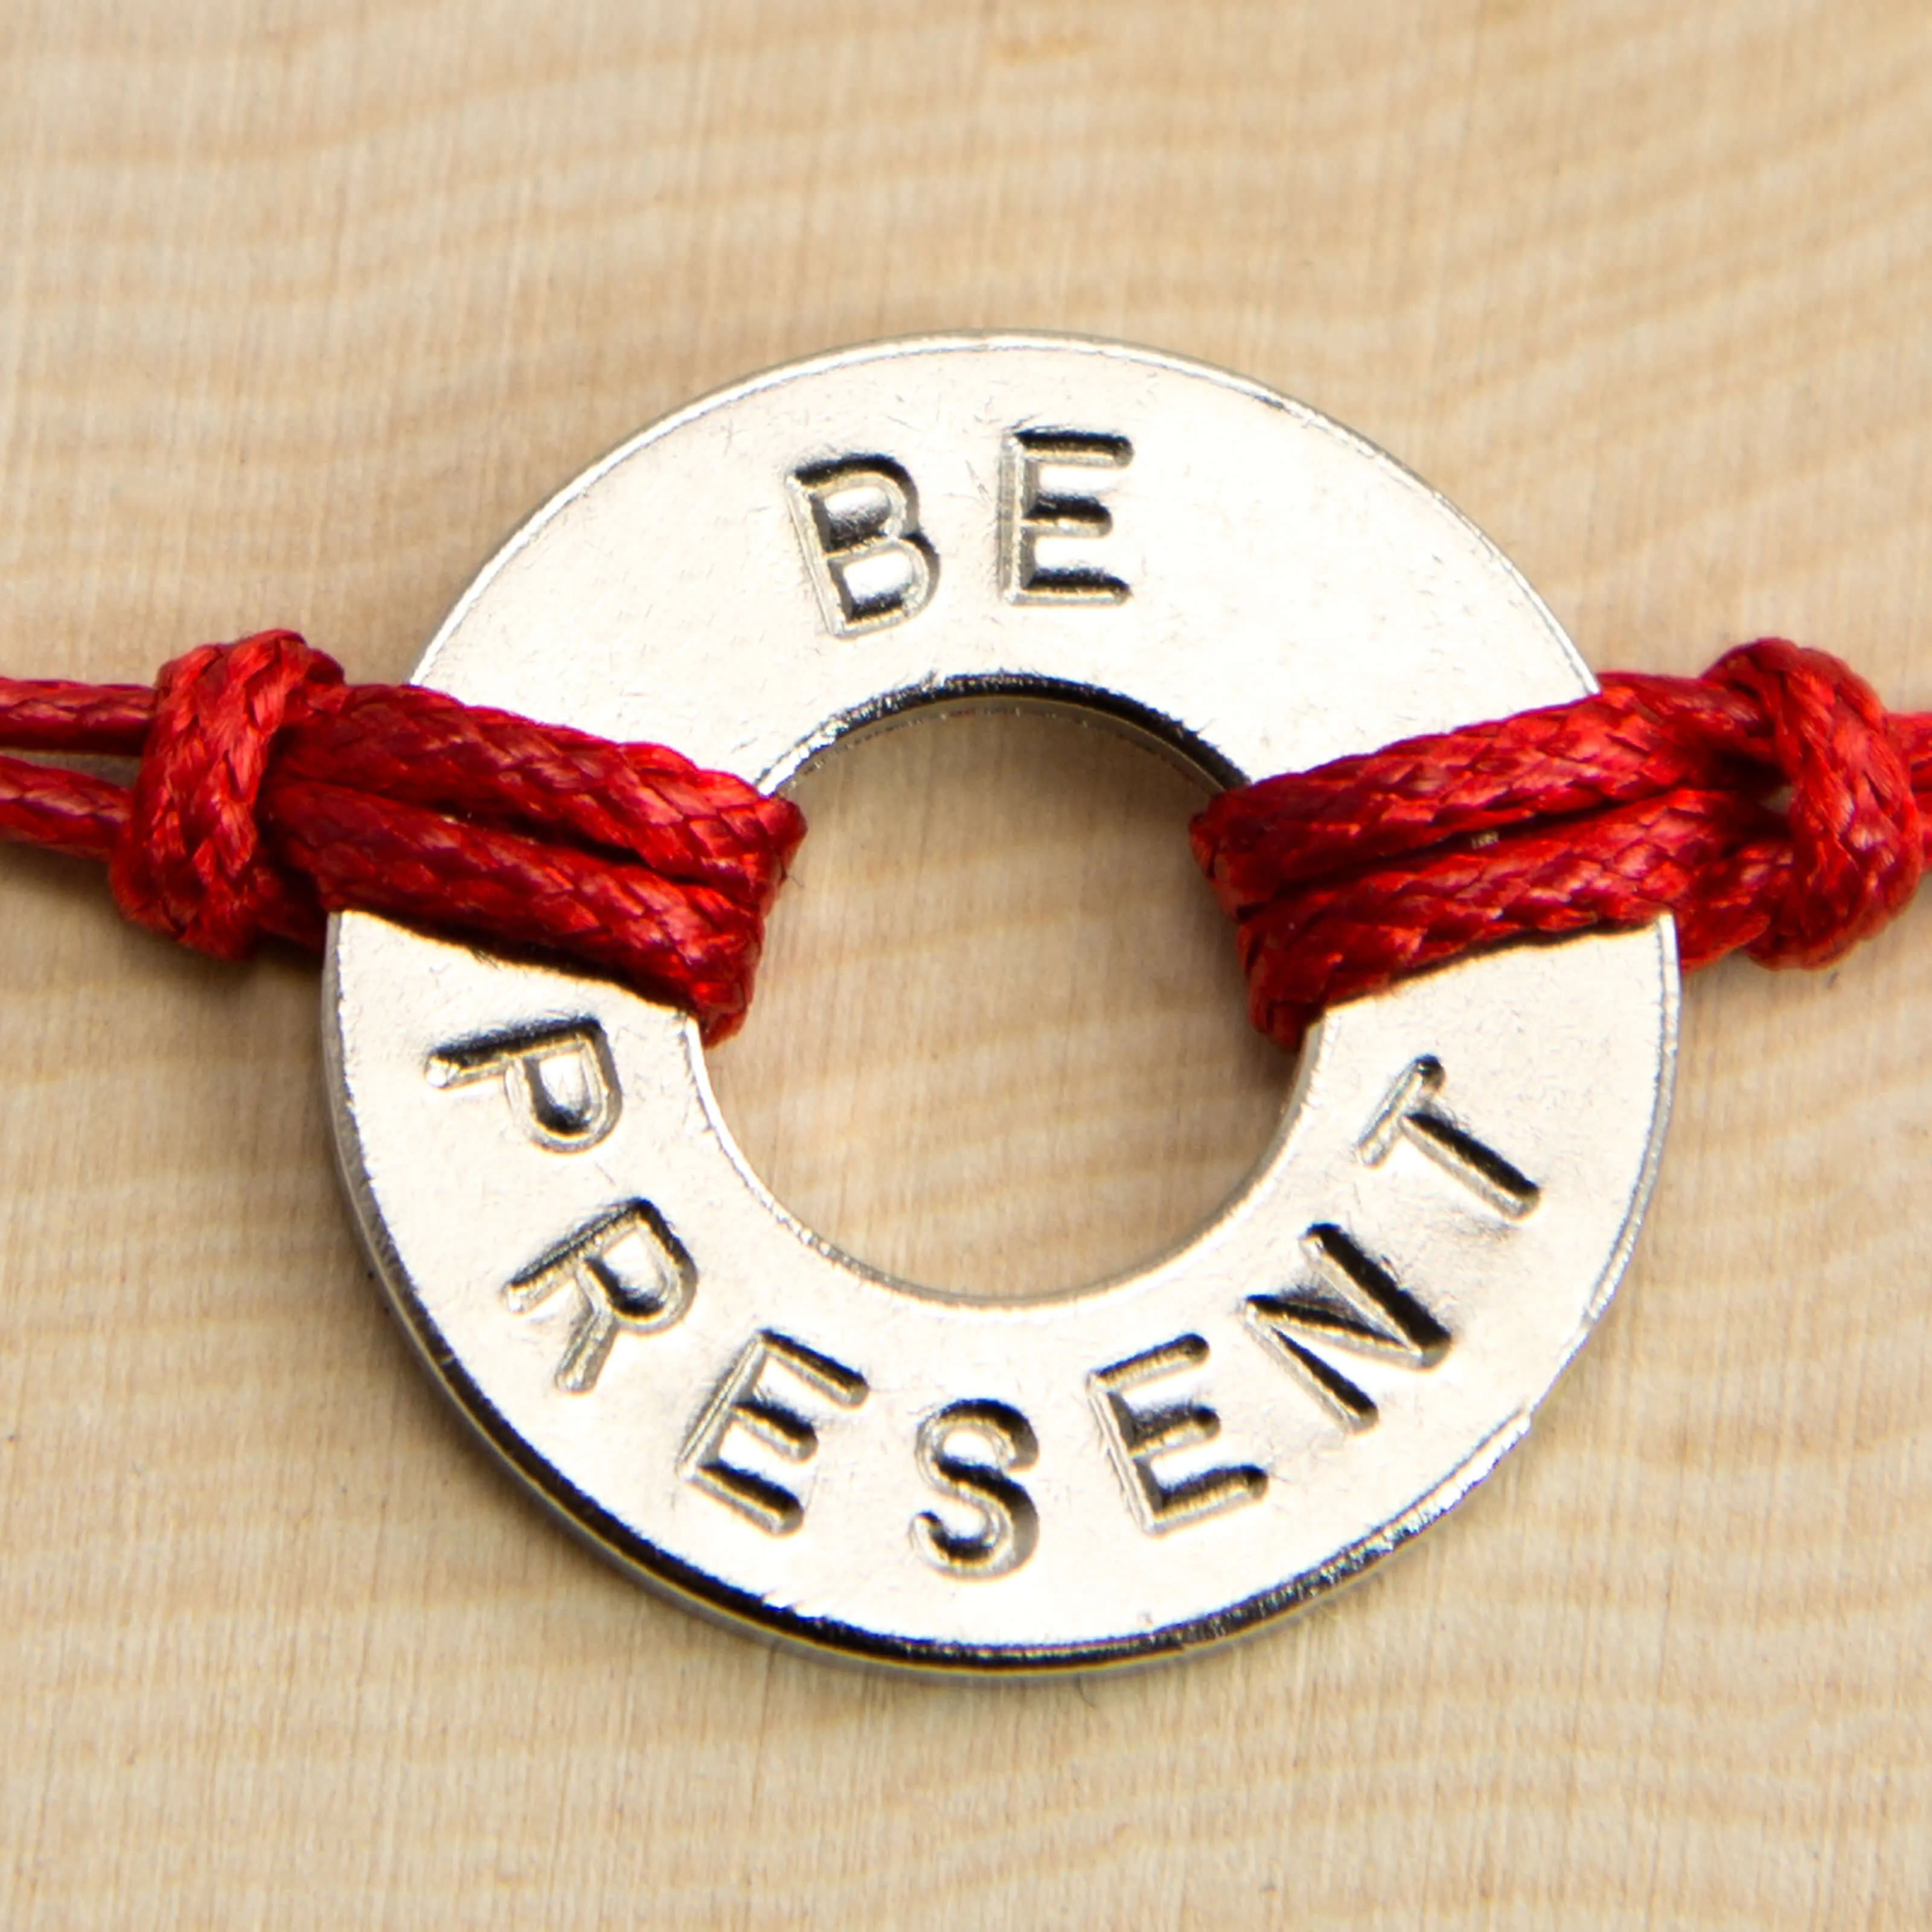 Washer with word "BE PRESENT" imprinted with red rope